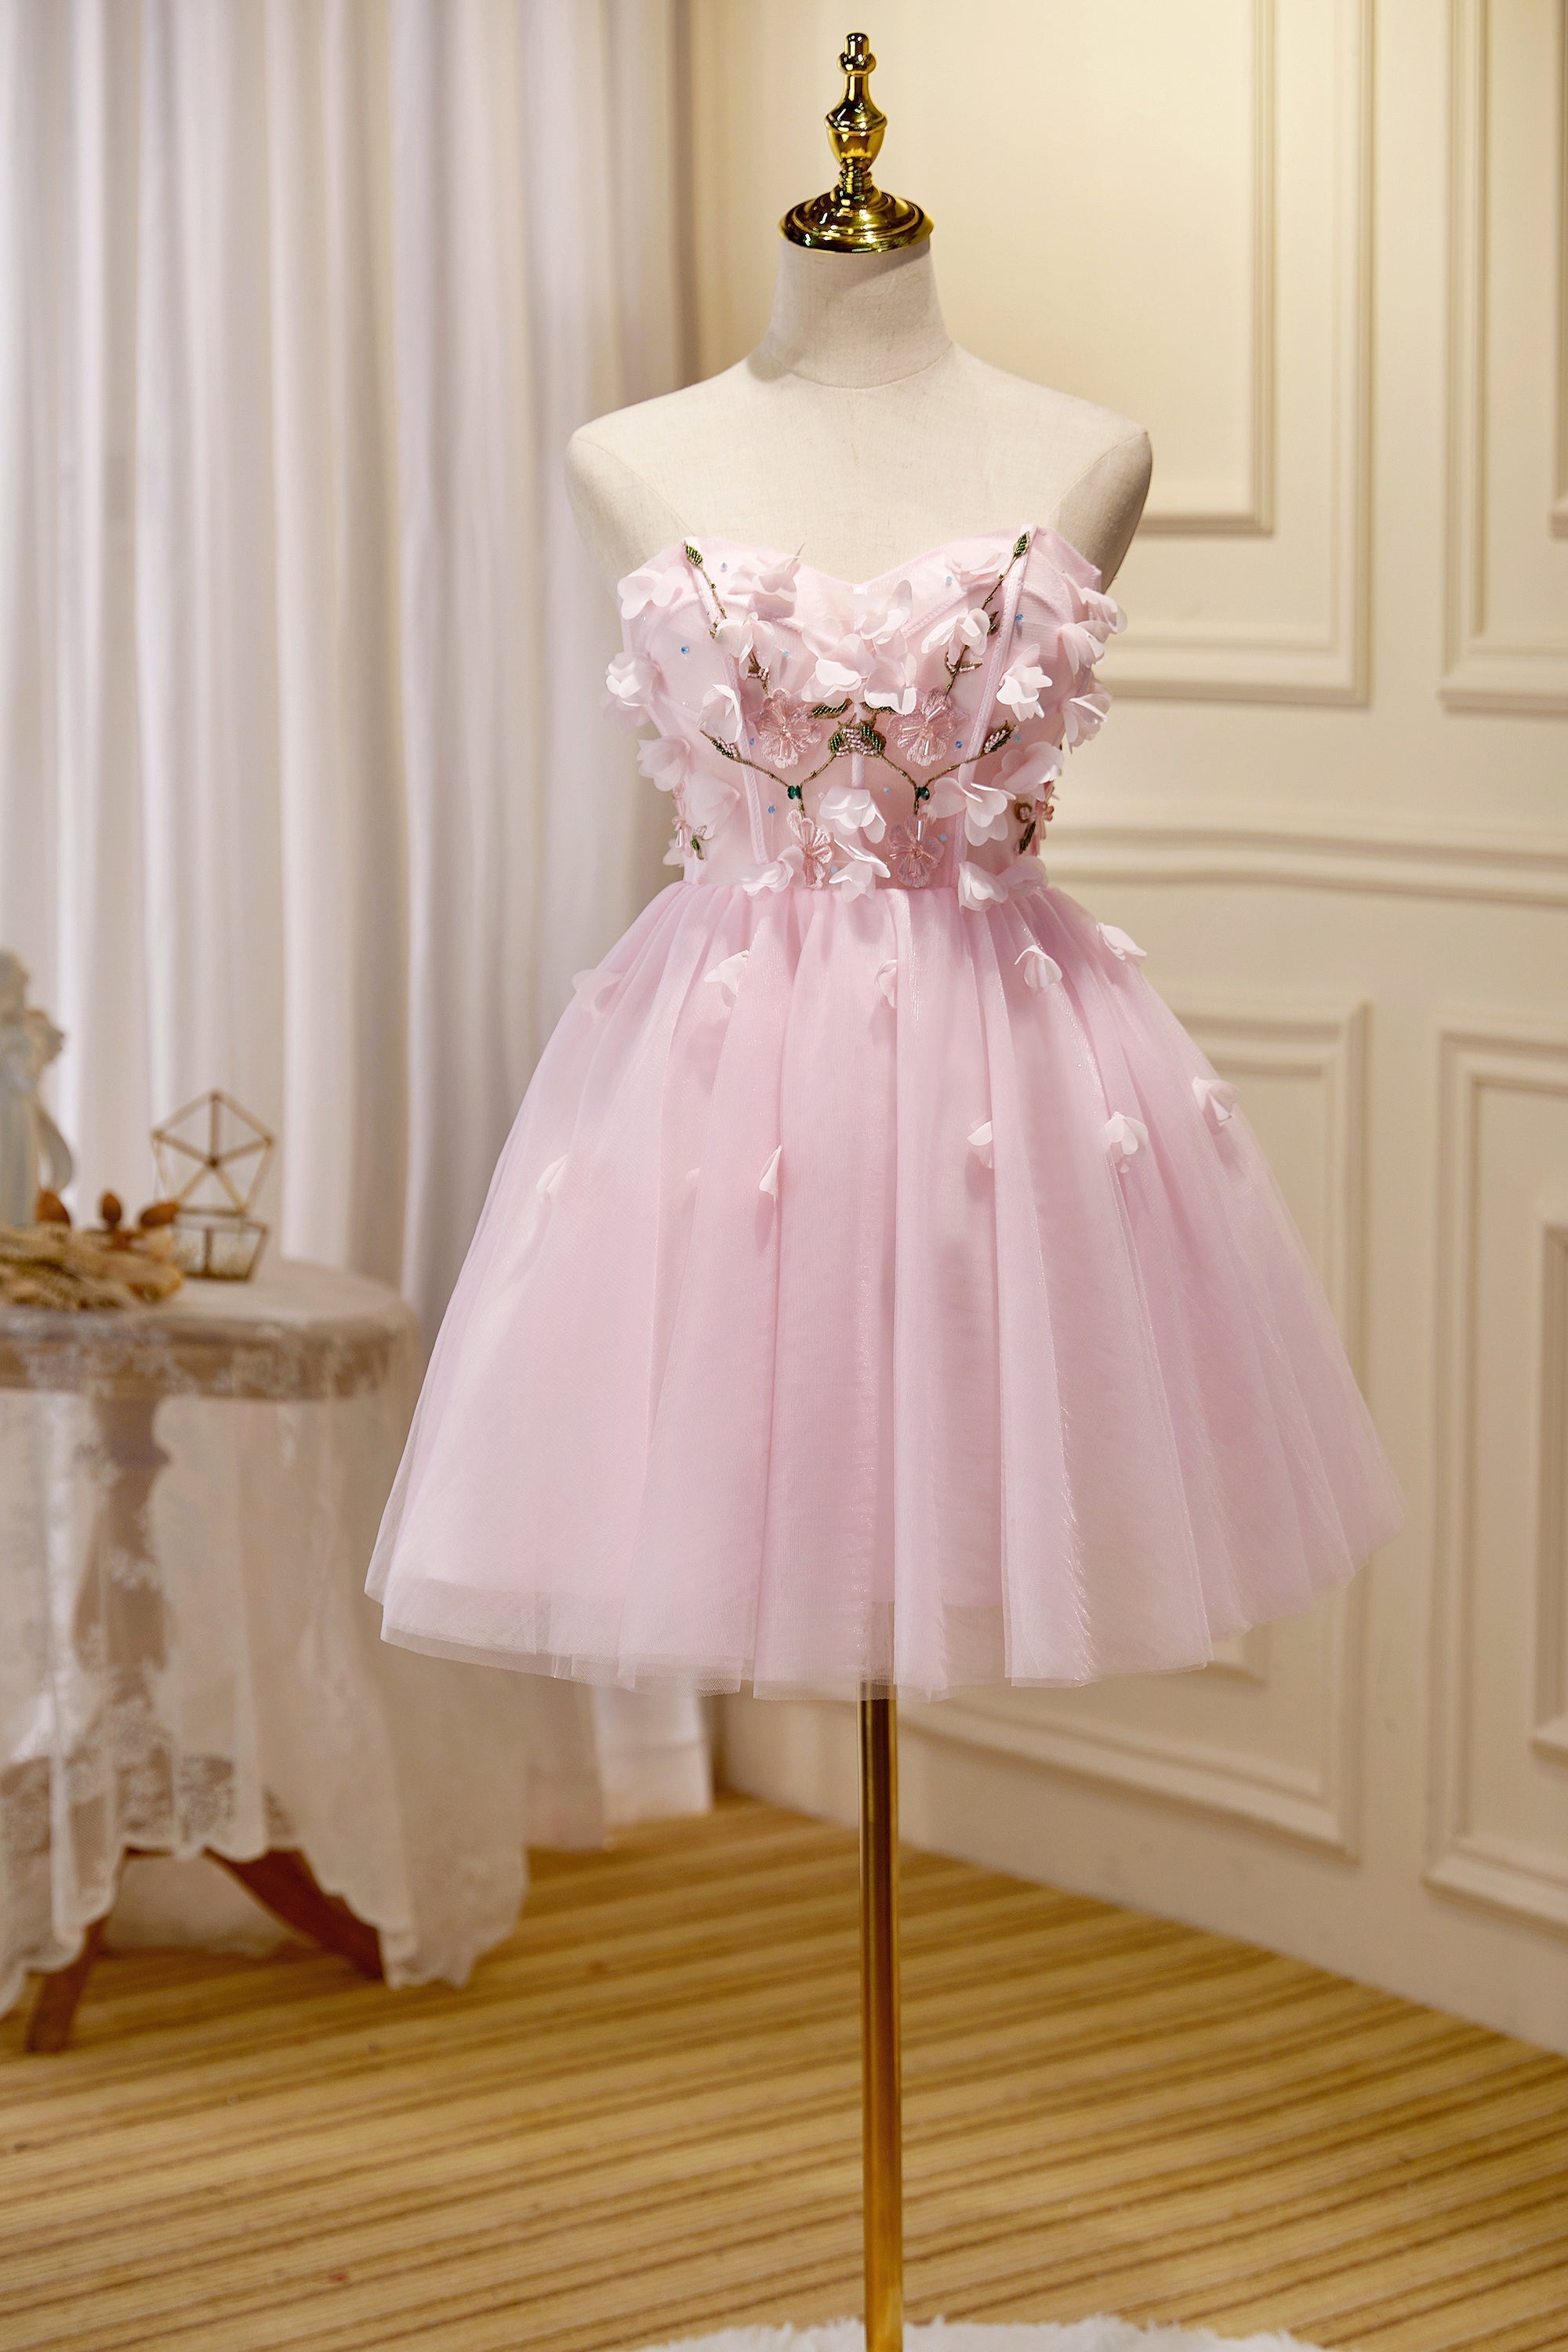 Cute Pink Strapless Sweetheart Appliques Tulle Short Corset Homecoming Dresses outfit, Bridesmaid Dresses Color Palette